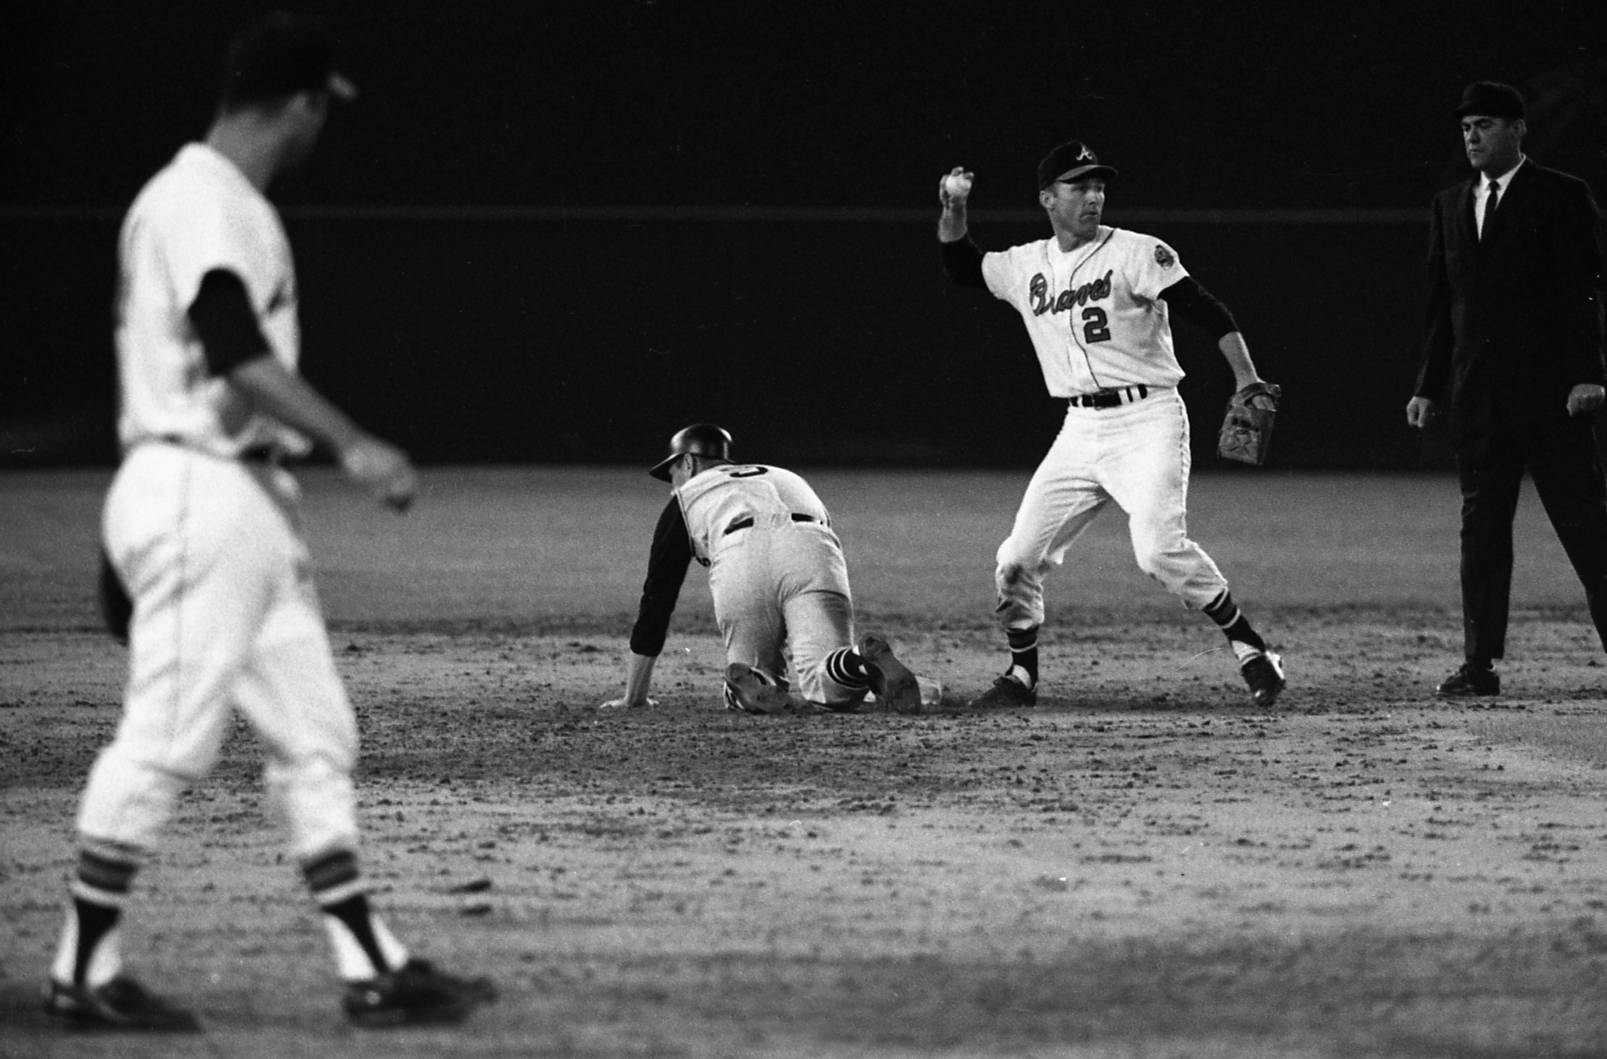 Atlanta Braves Archives » Page 3 of 33 » Through The Fence Baseball